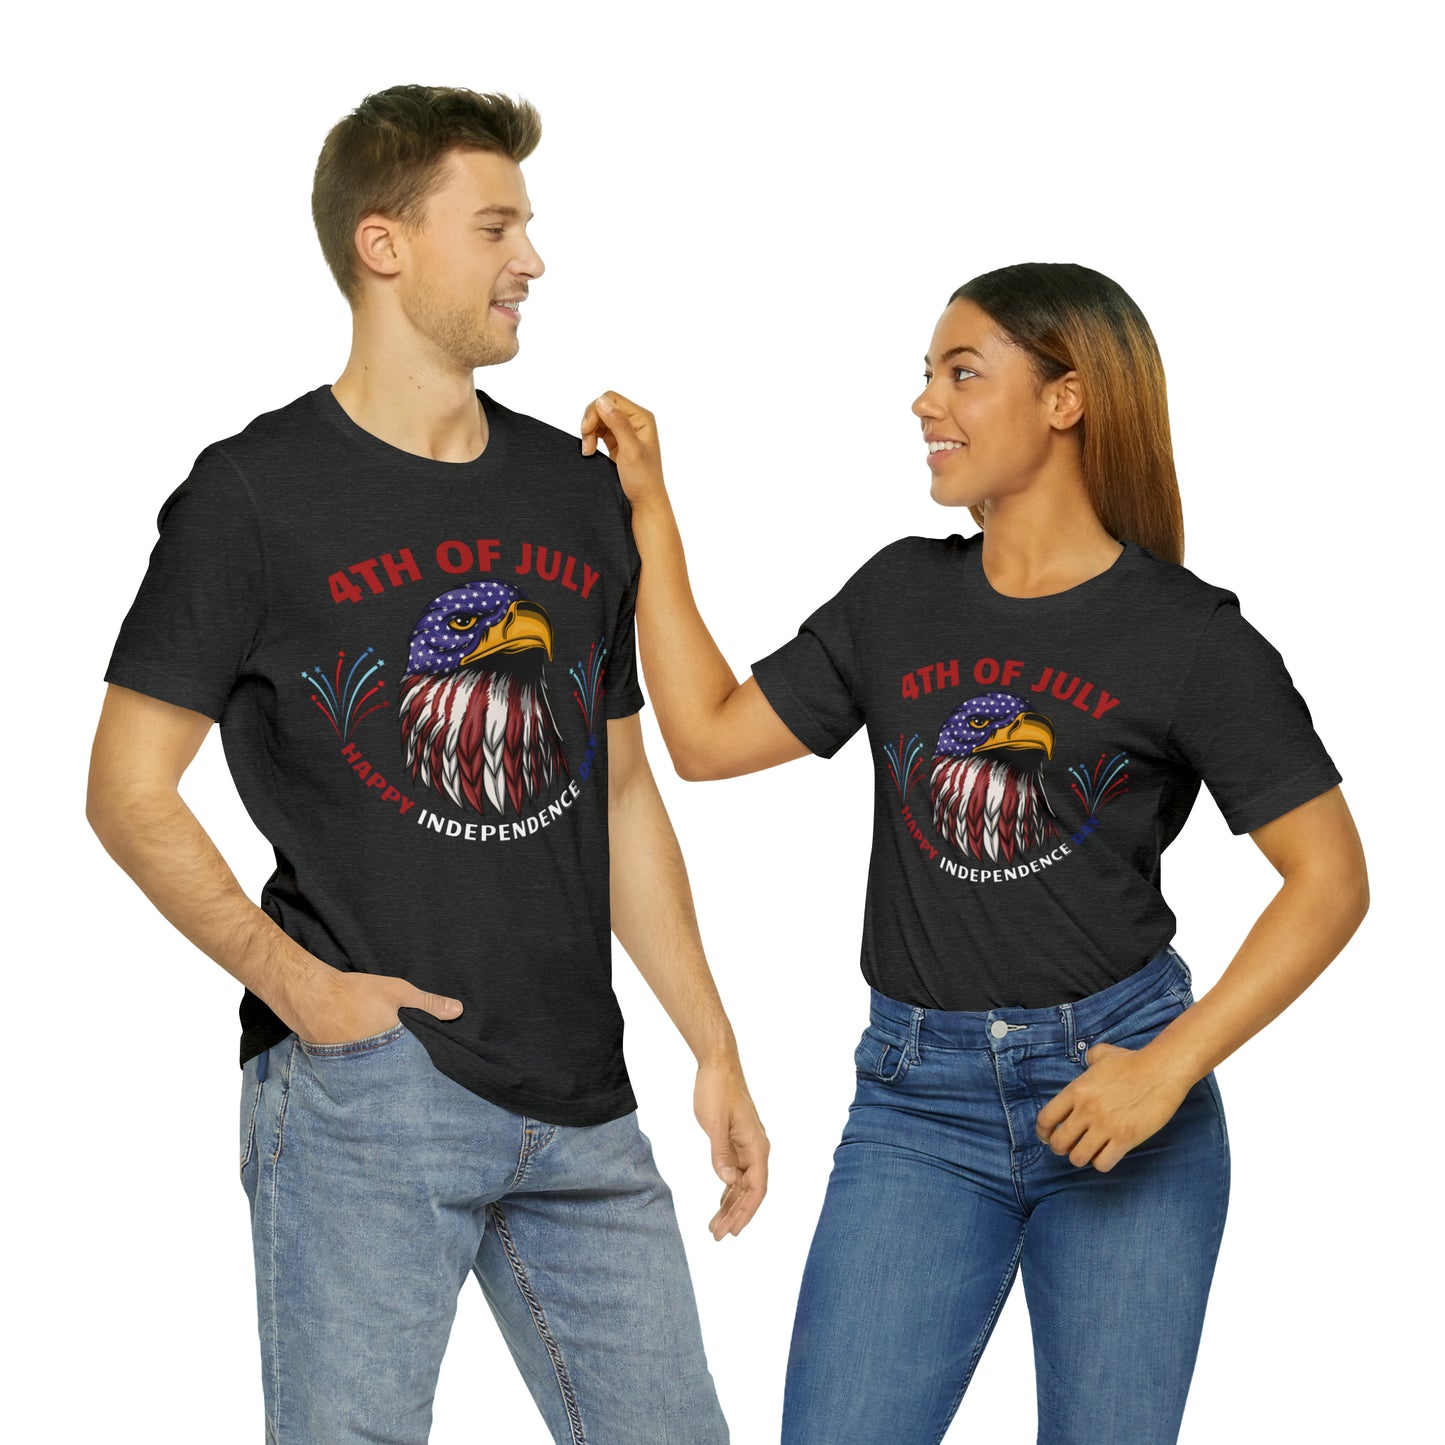 Celebrate Independence Day with Patriotic Shirts: Land of the free Shirts for Women and Men